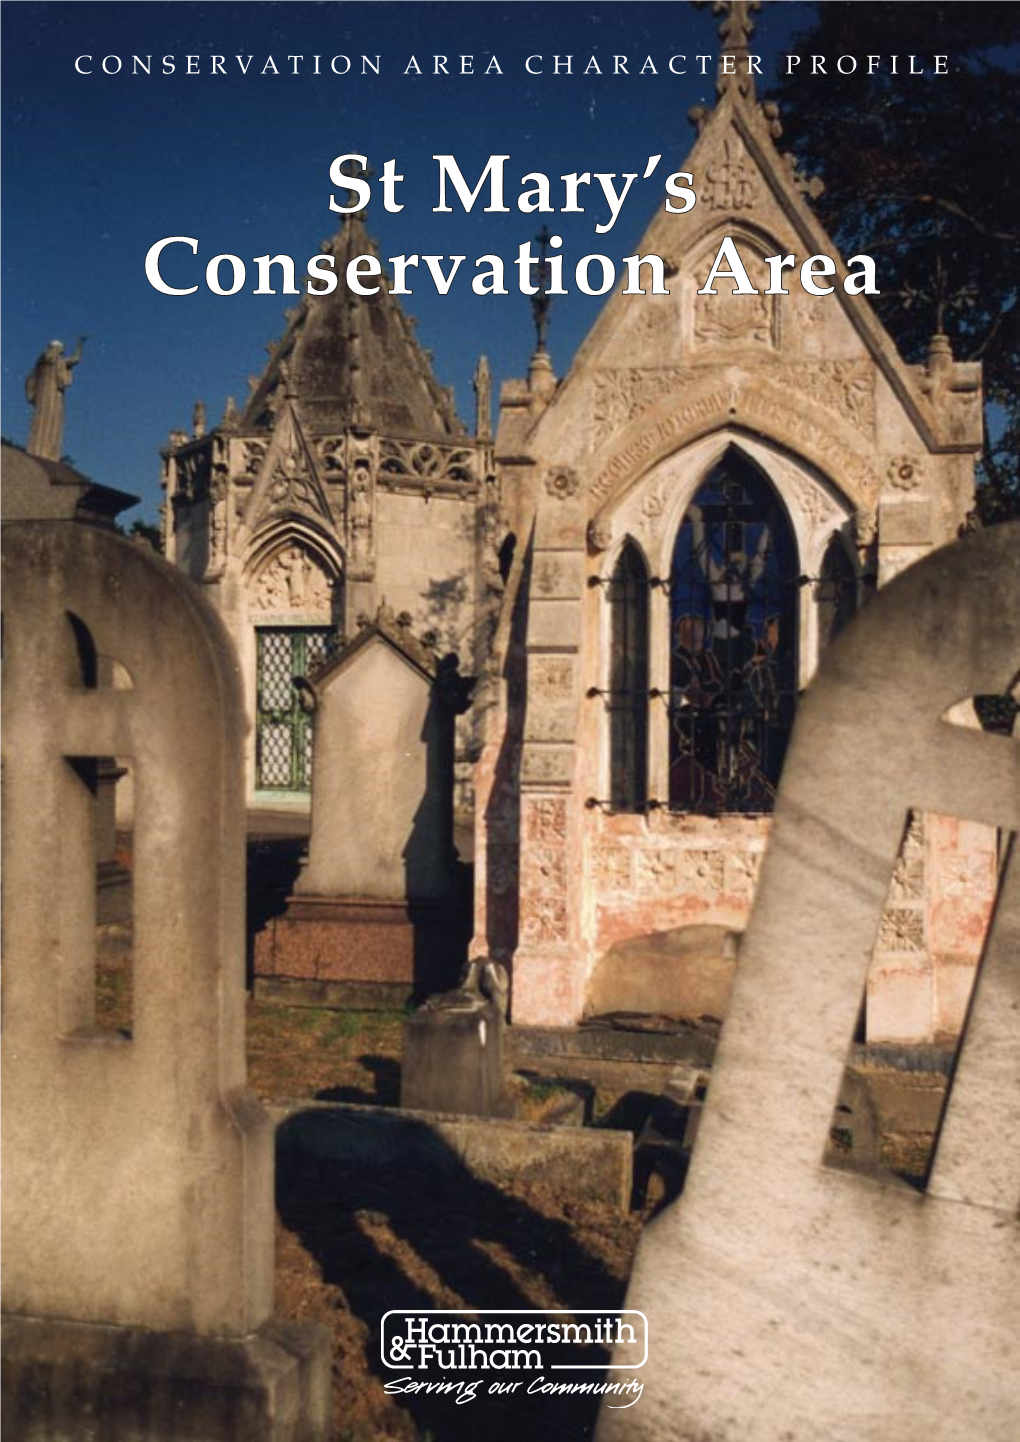 St Mary's Conservation Area